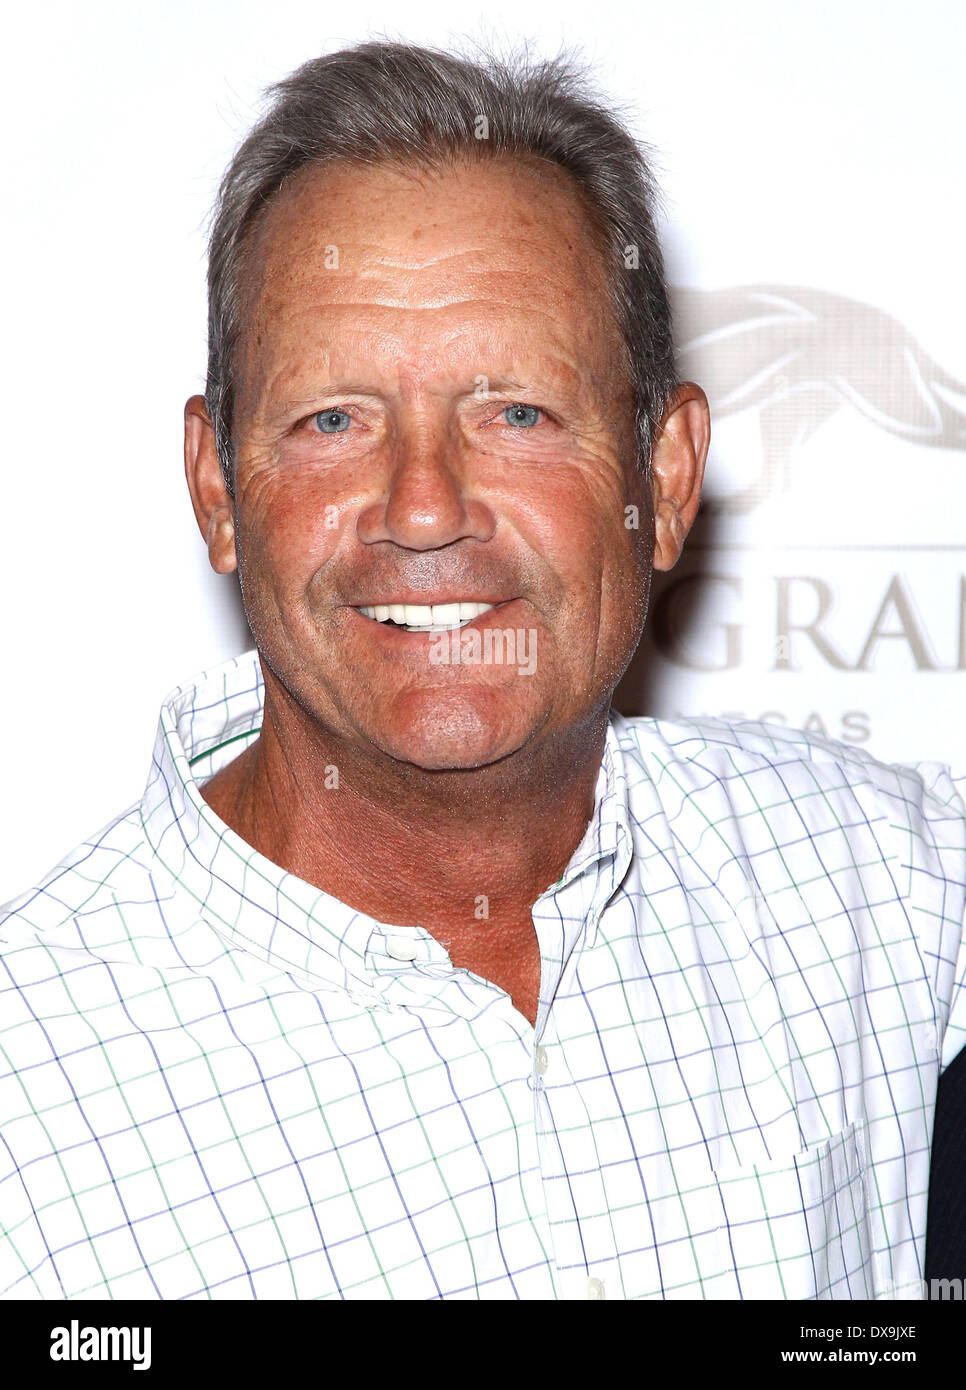 George brett hi-res stock photography and images - Alamy